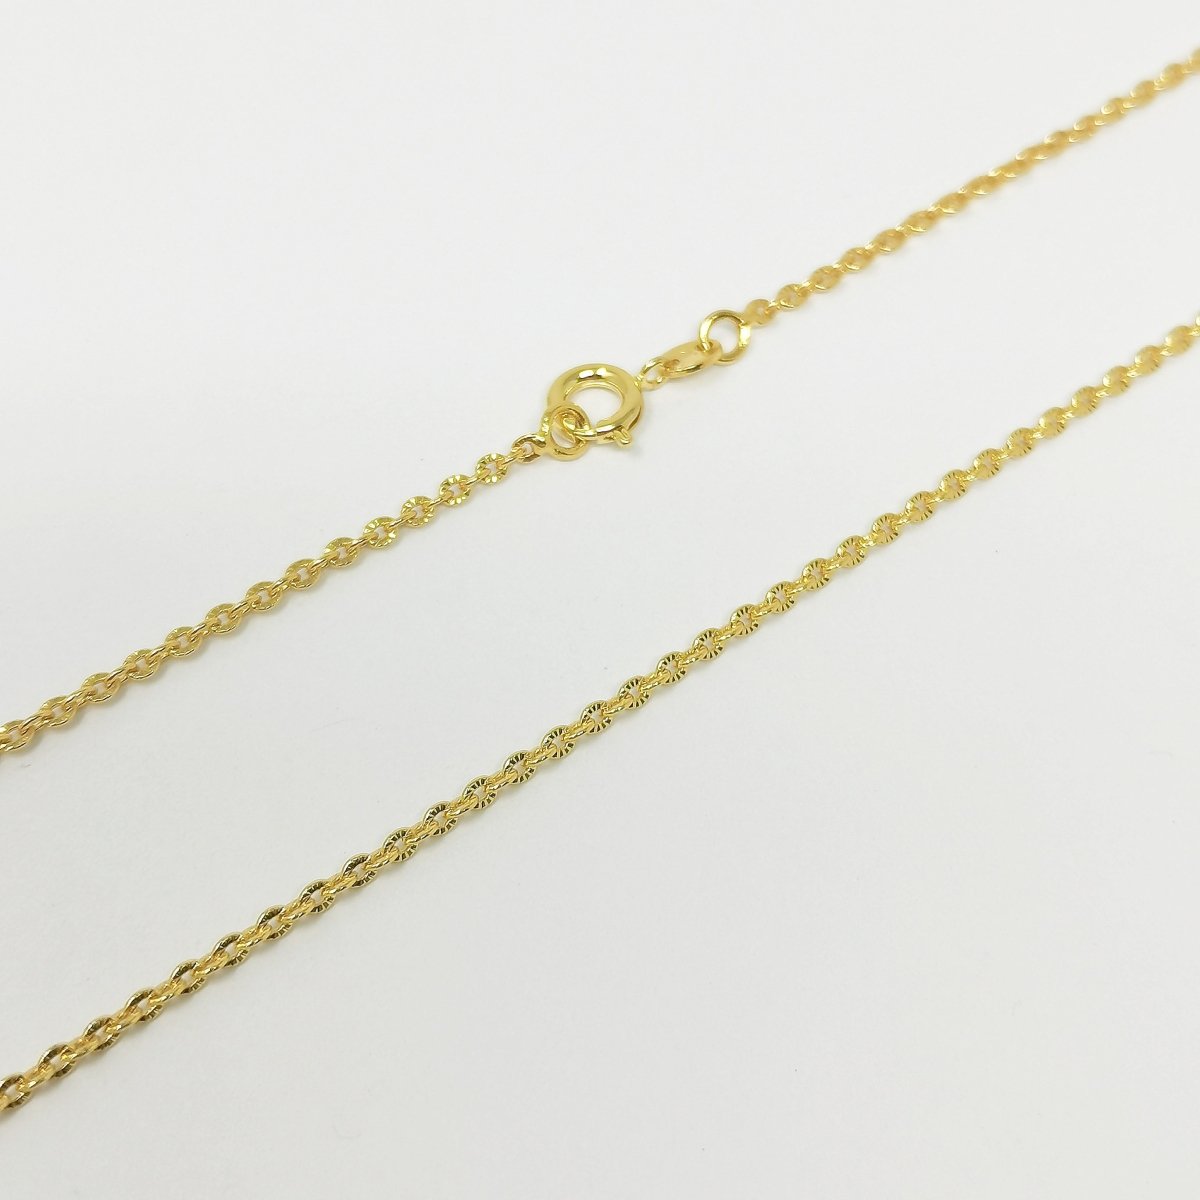 24K Gold Filled Rolo Necklace, Minimalist 17.7 Inch Chain, Dainty 1.8mm Rolo Necklace w/ Spring Ring | CN-971 Clearance Pricing - DLUXCA